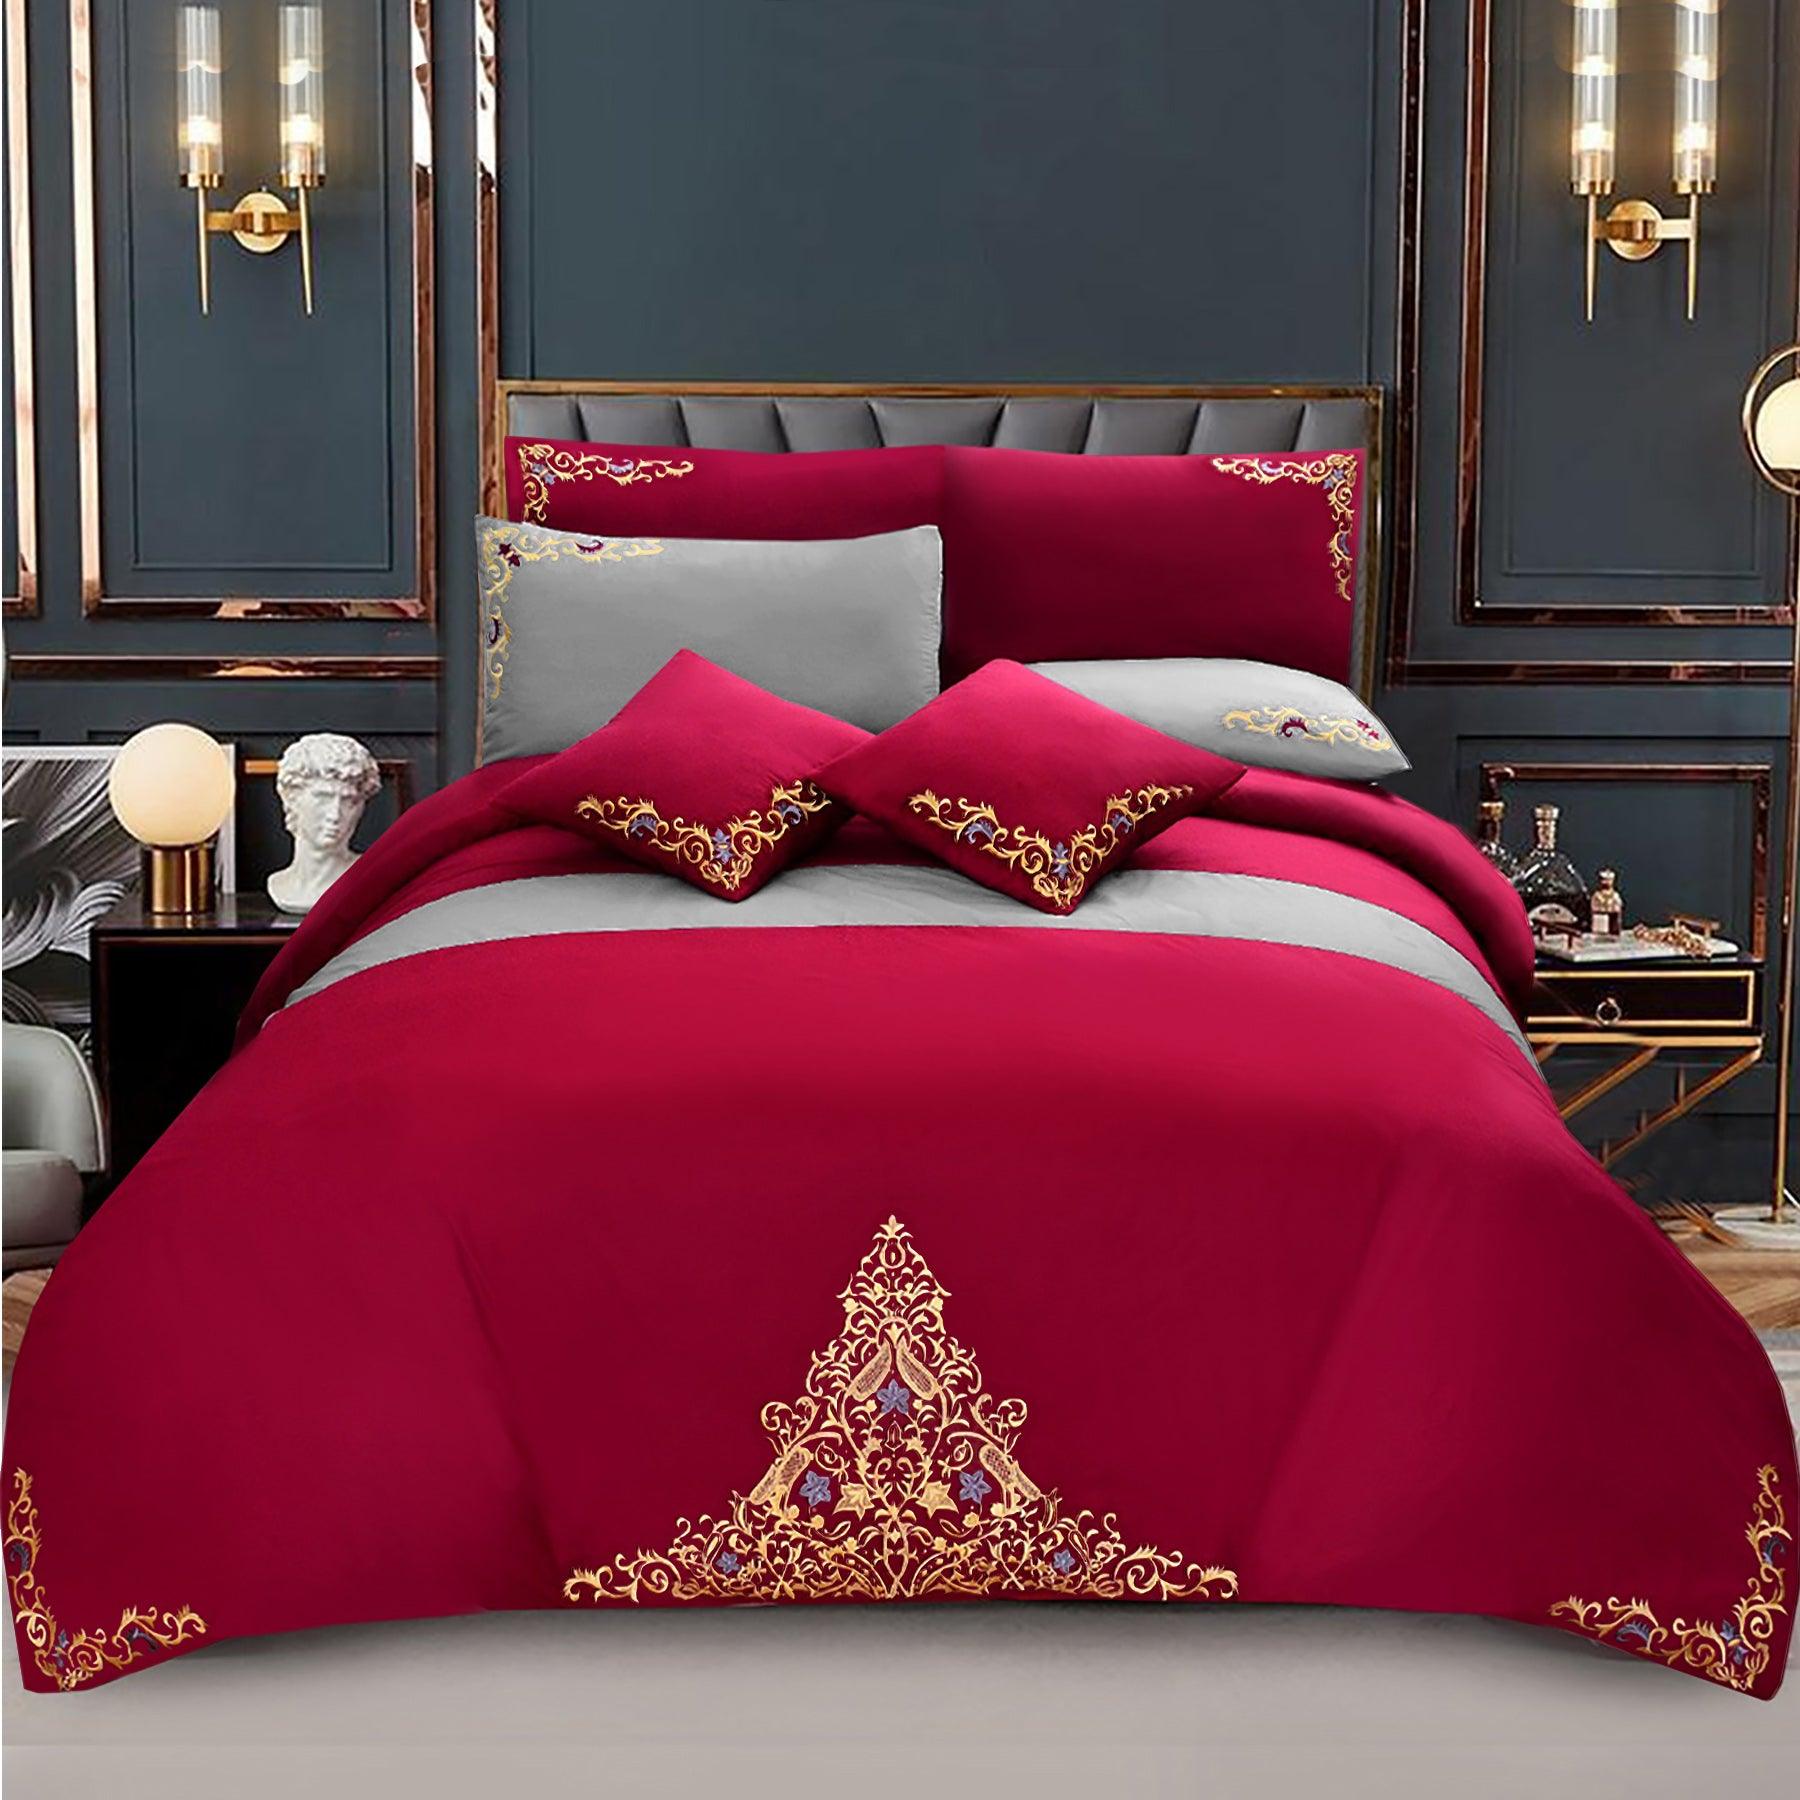 Mariana Centered Embroidered Motif Duvet Cover Set Maroon - 92Bedding